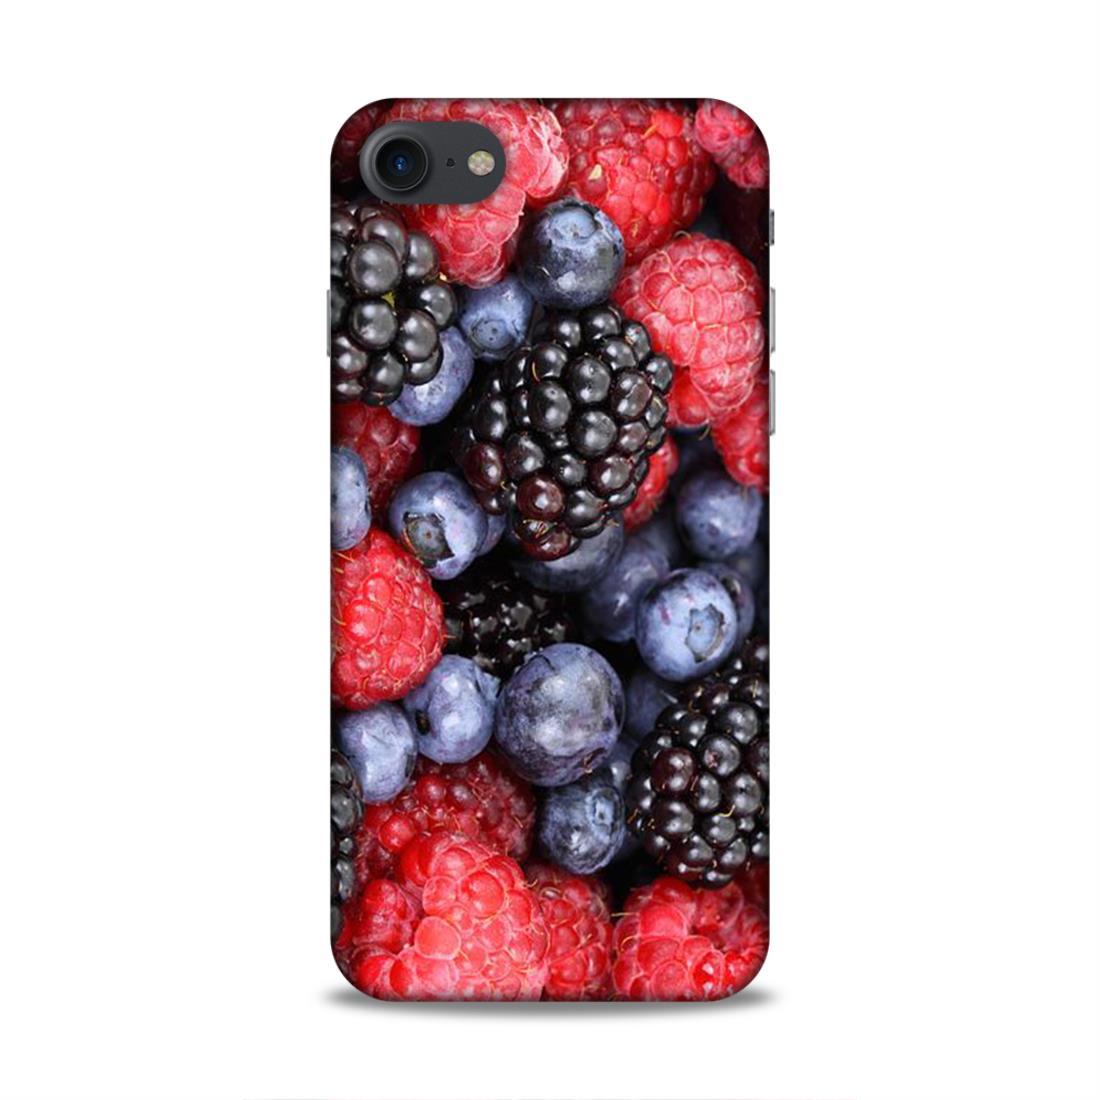 MultiFruits Love iPhone 7 Mobile Back Case